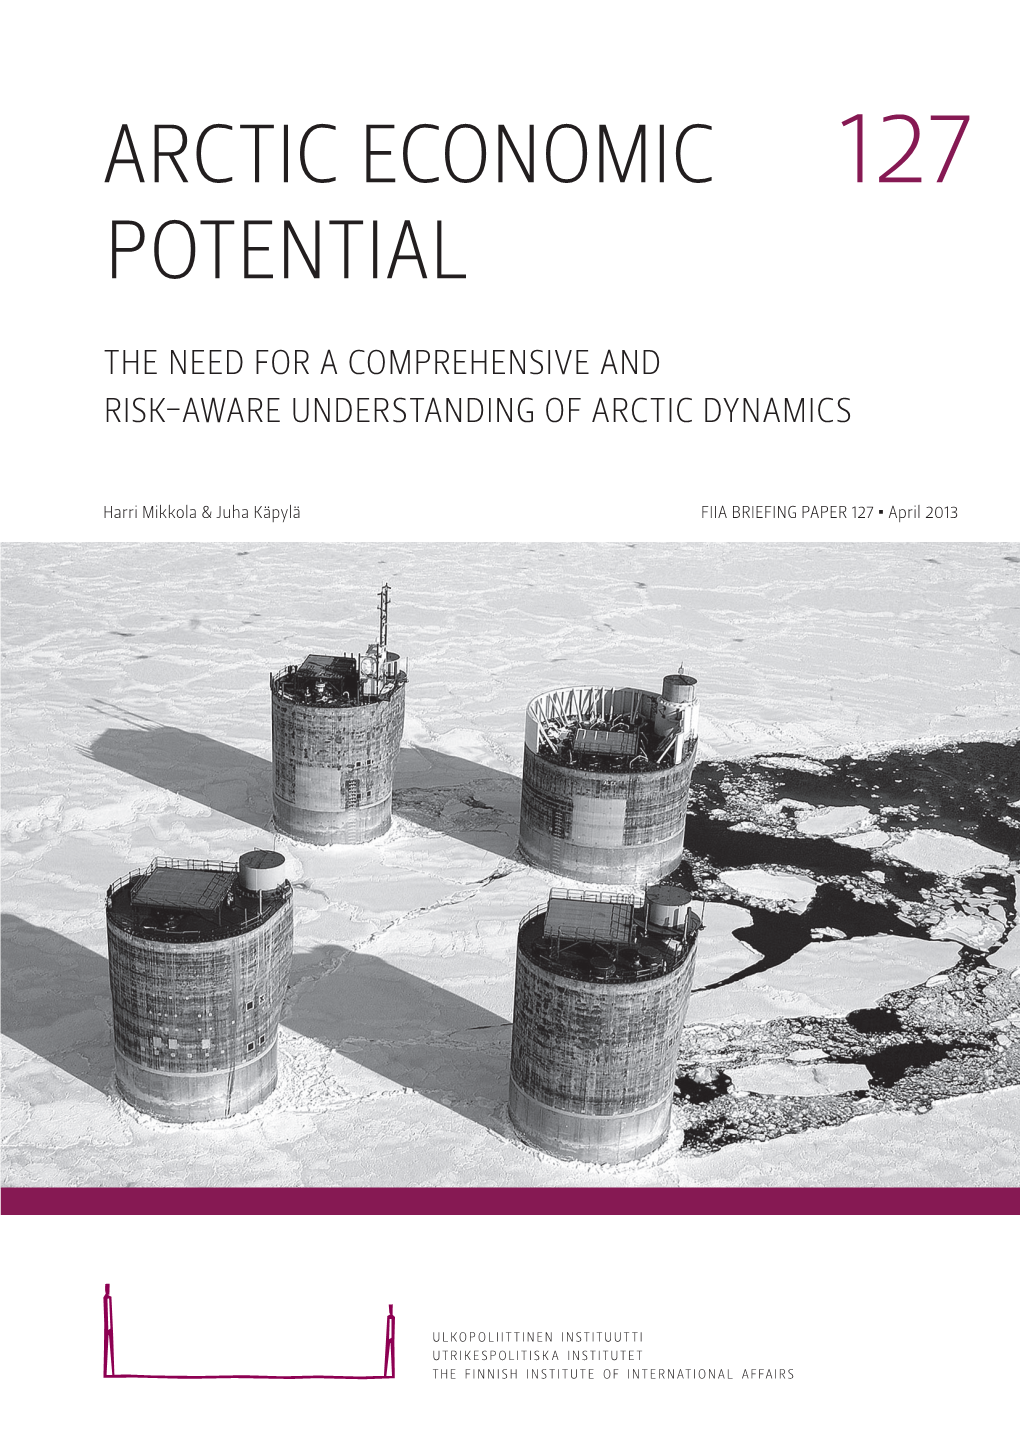 Arctic Economic Potential the Need for a Comprehensive and Risk-Aware Understanding of Arctic Dynamics